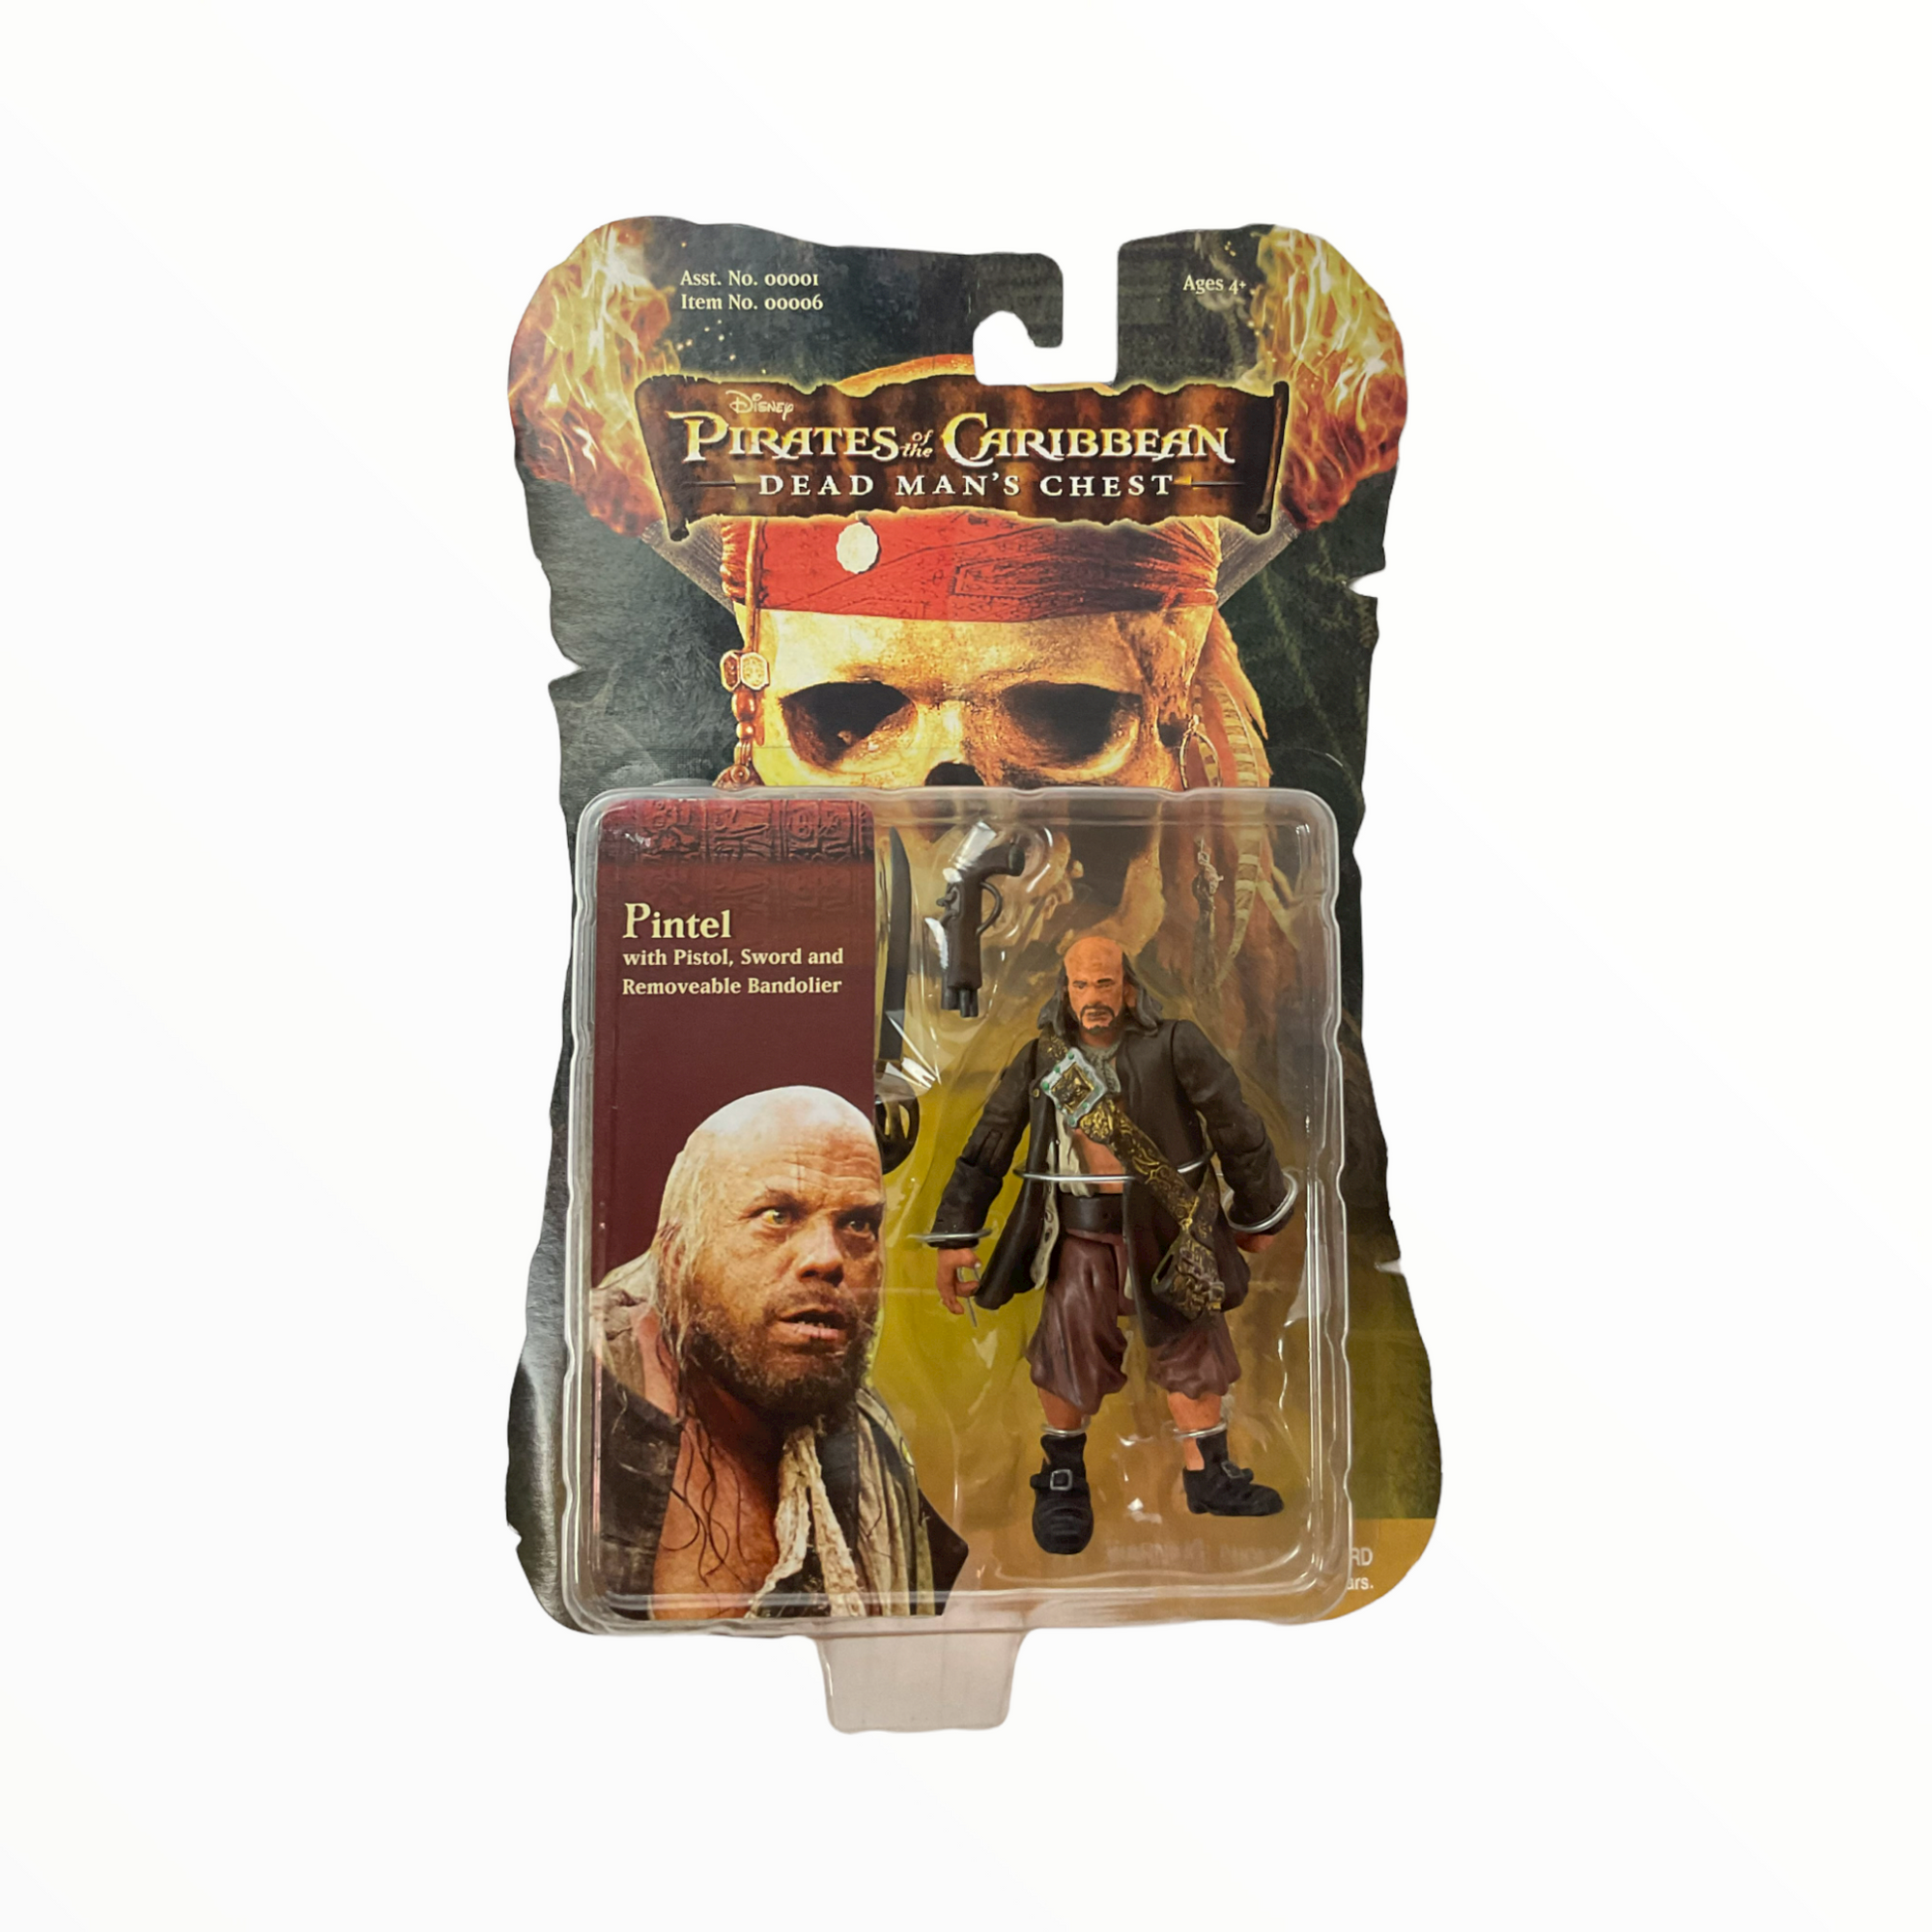 Pirates of the Caribbean Dead Man's Chest Pintel